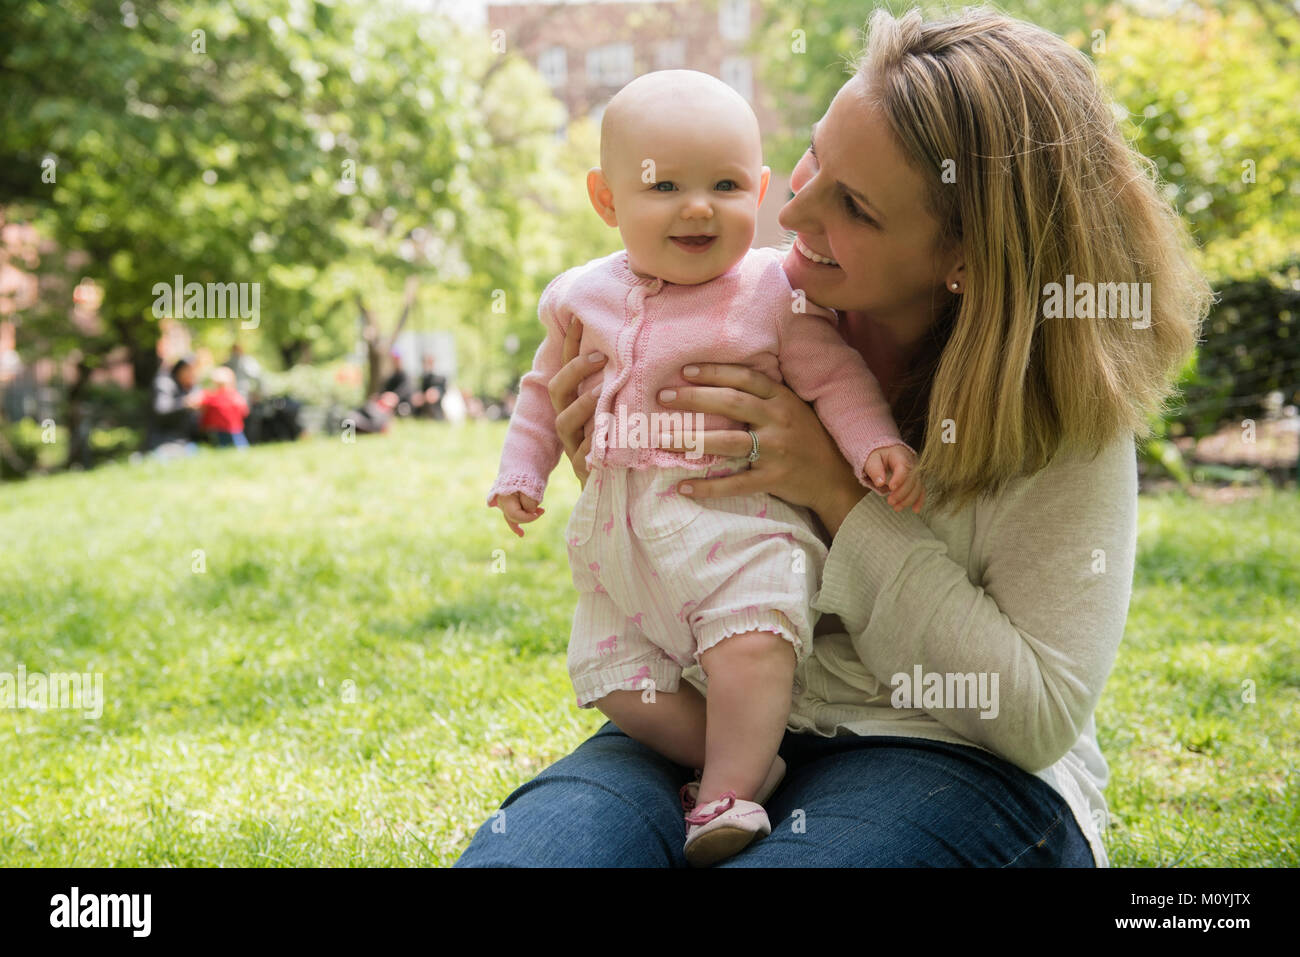 Portrait of Caucasian mother holding baby daughter in park Banque D'Images